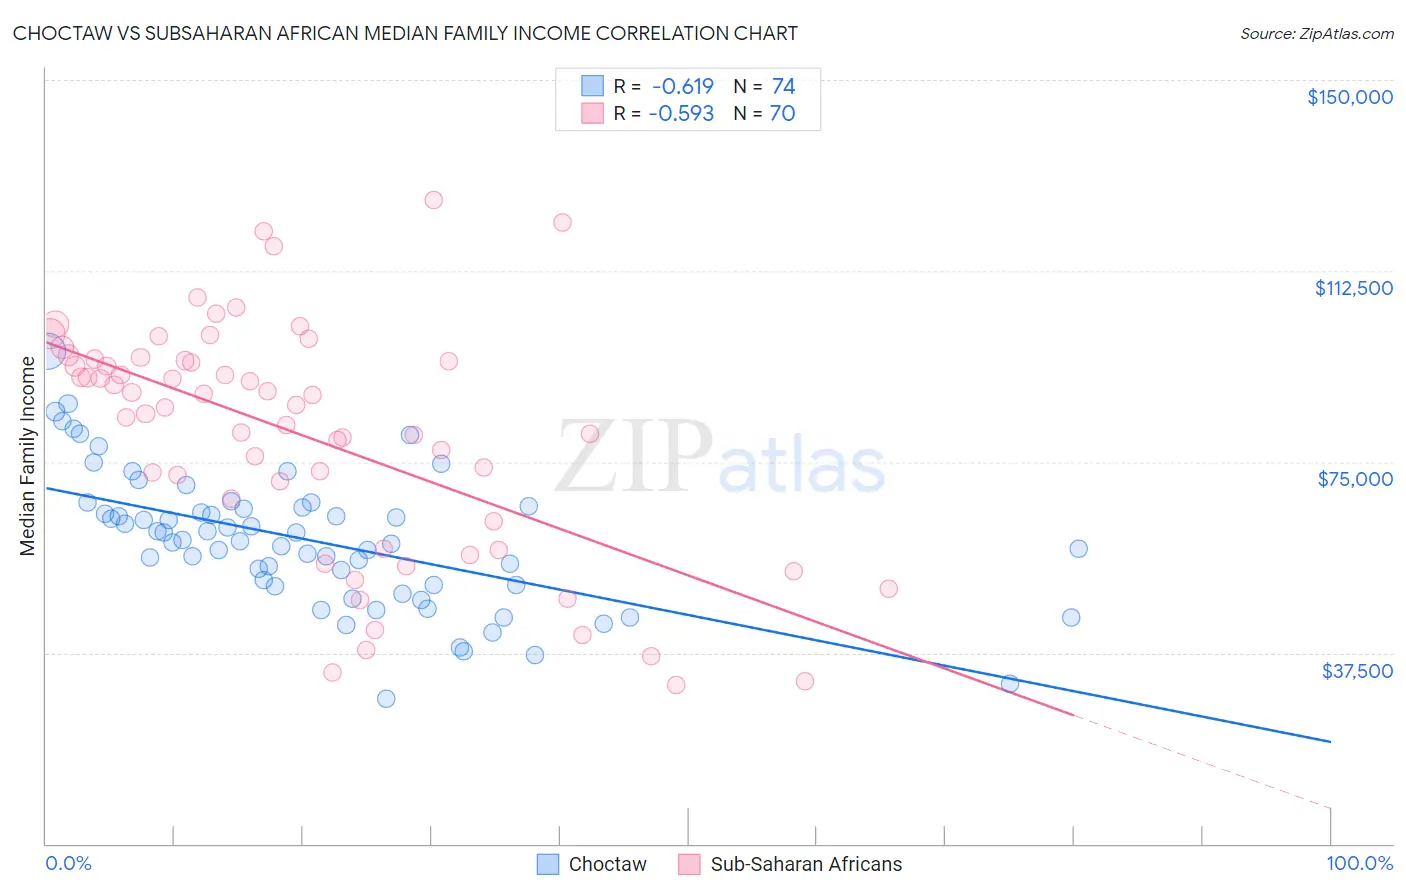 Choctaw vs Subsaharan African Median Family Income